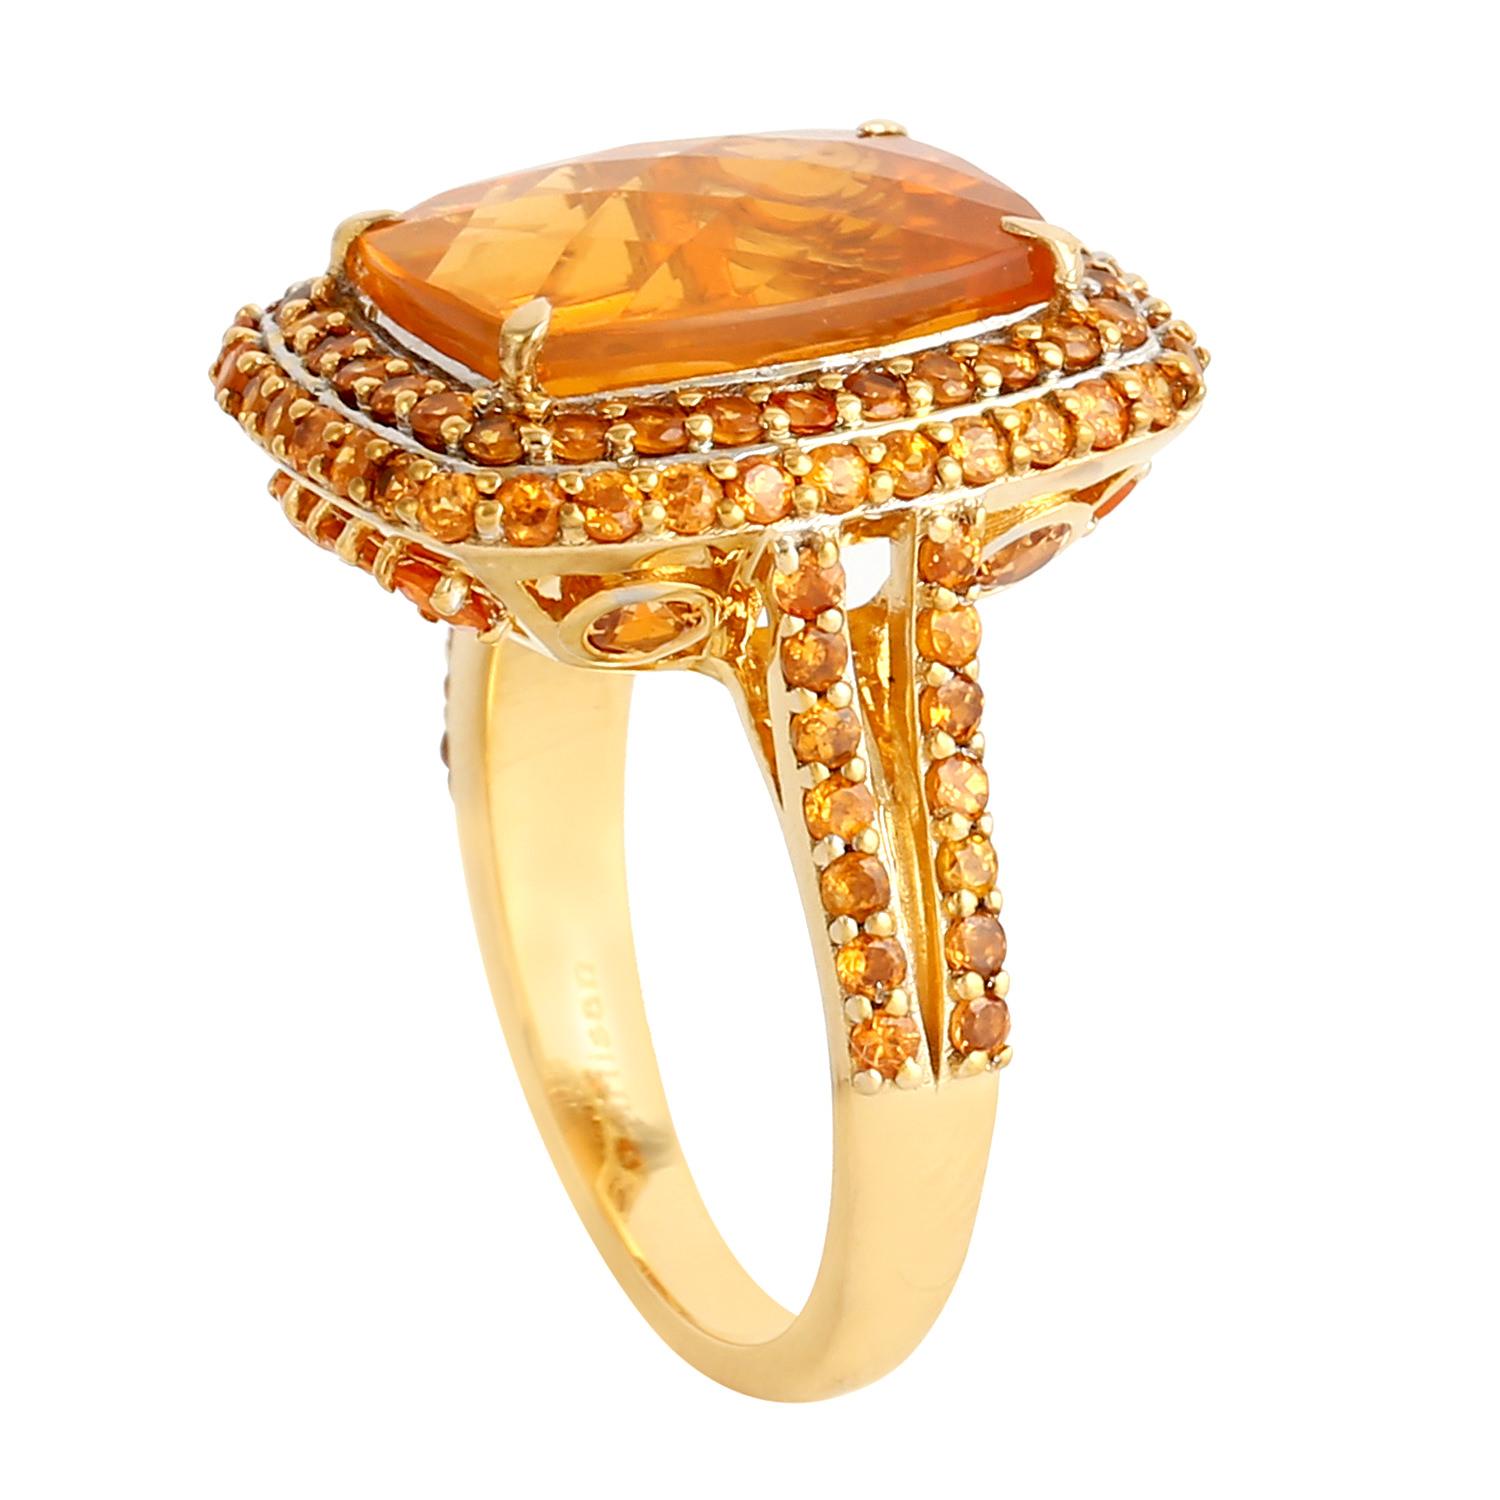 Cushion Cut Natural Fire Opal Cocktail Ring Orange Garnets 9.15 Carats 18K Yellow Gold For Sale